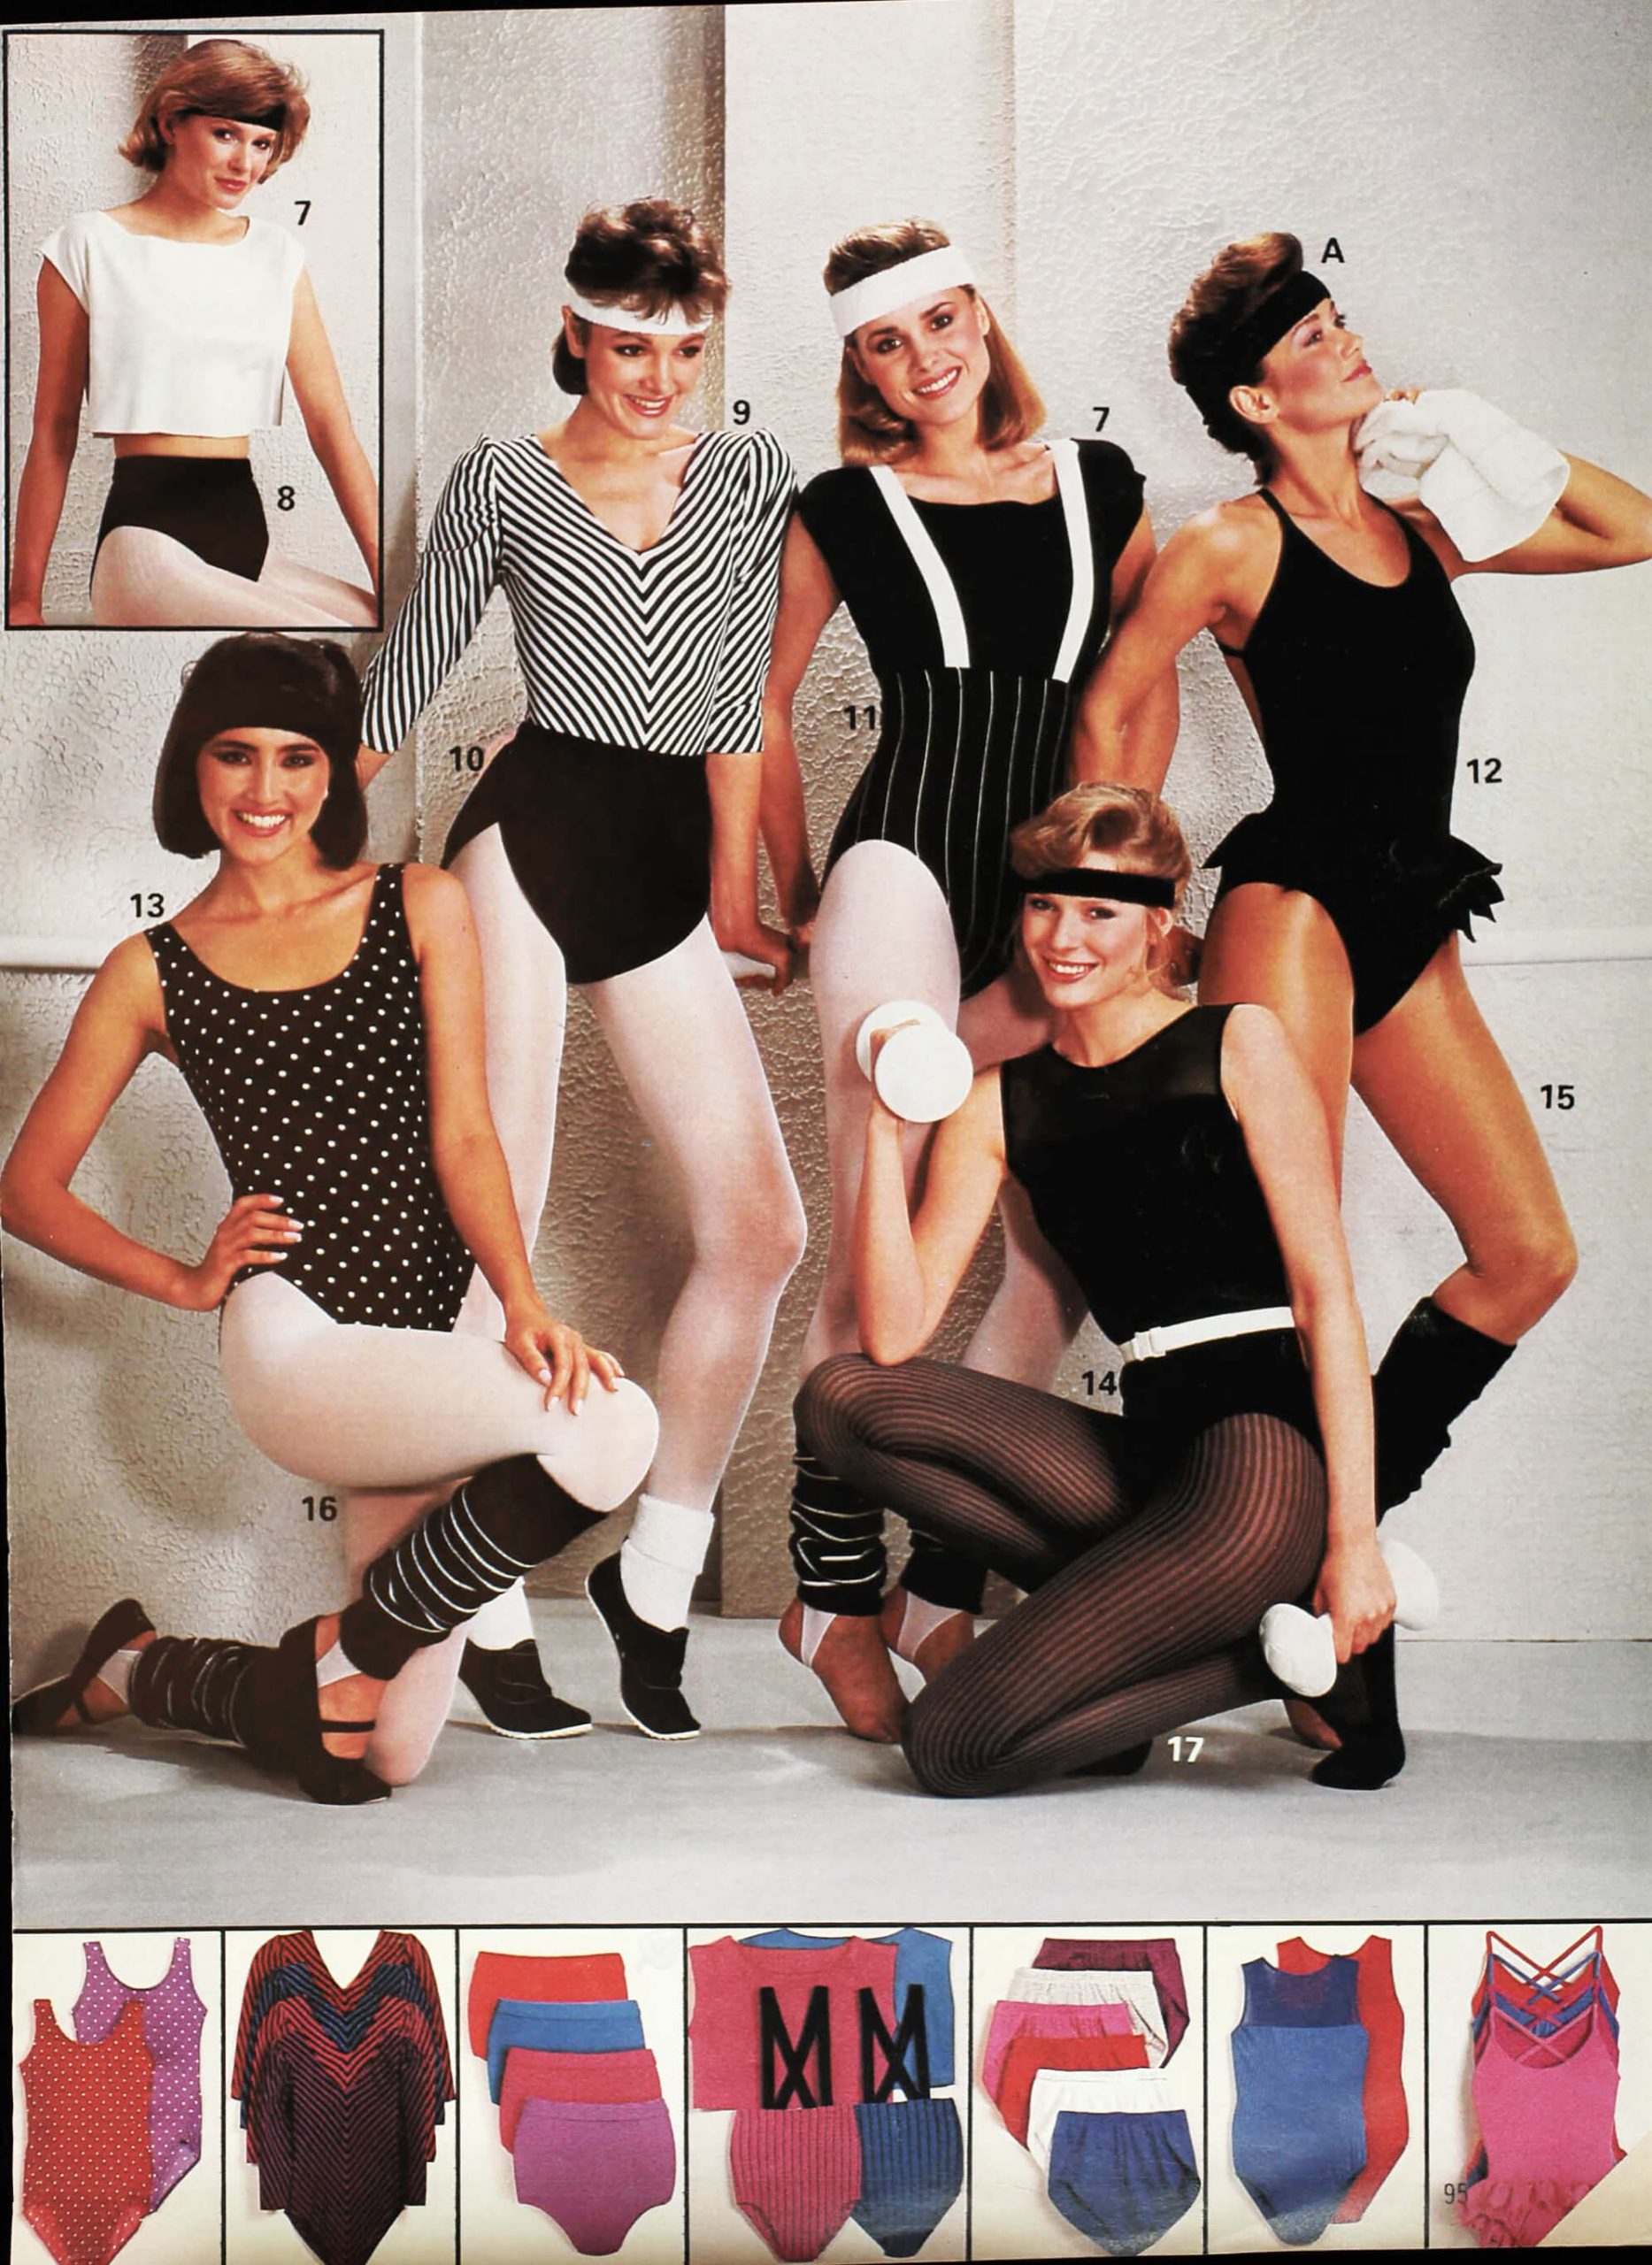 Jazzercise poster, 1984 vintage press photo print - Historic Images